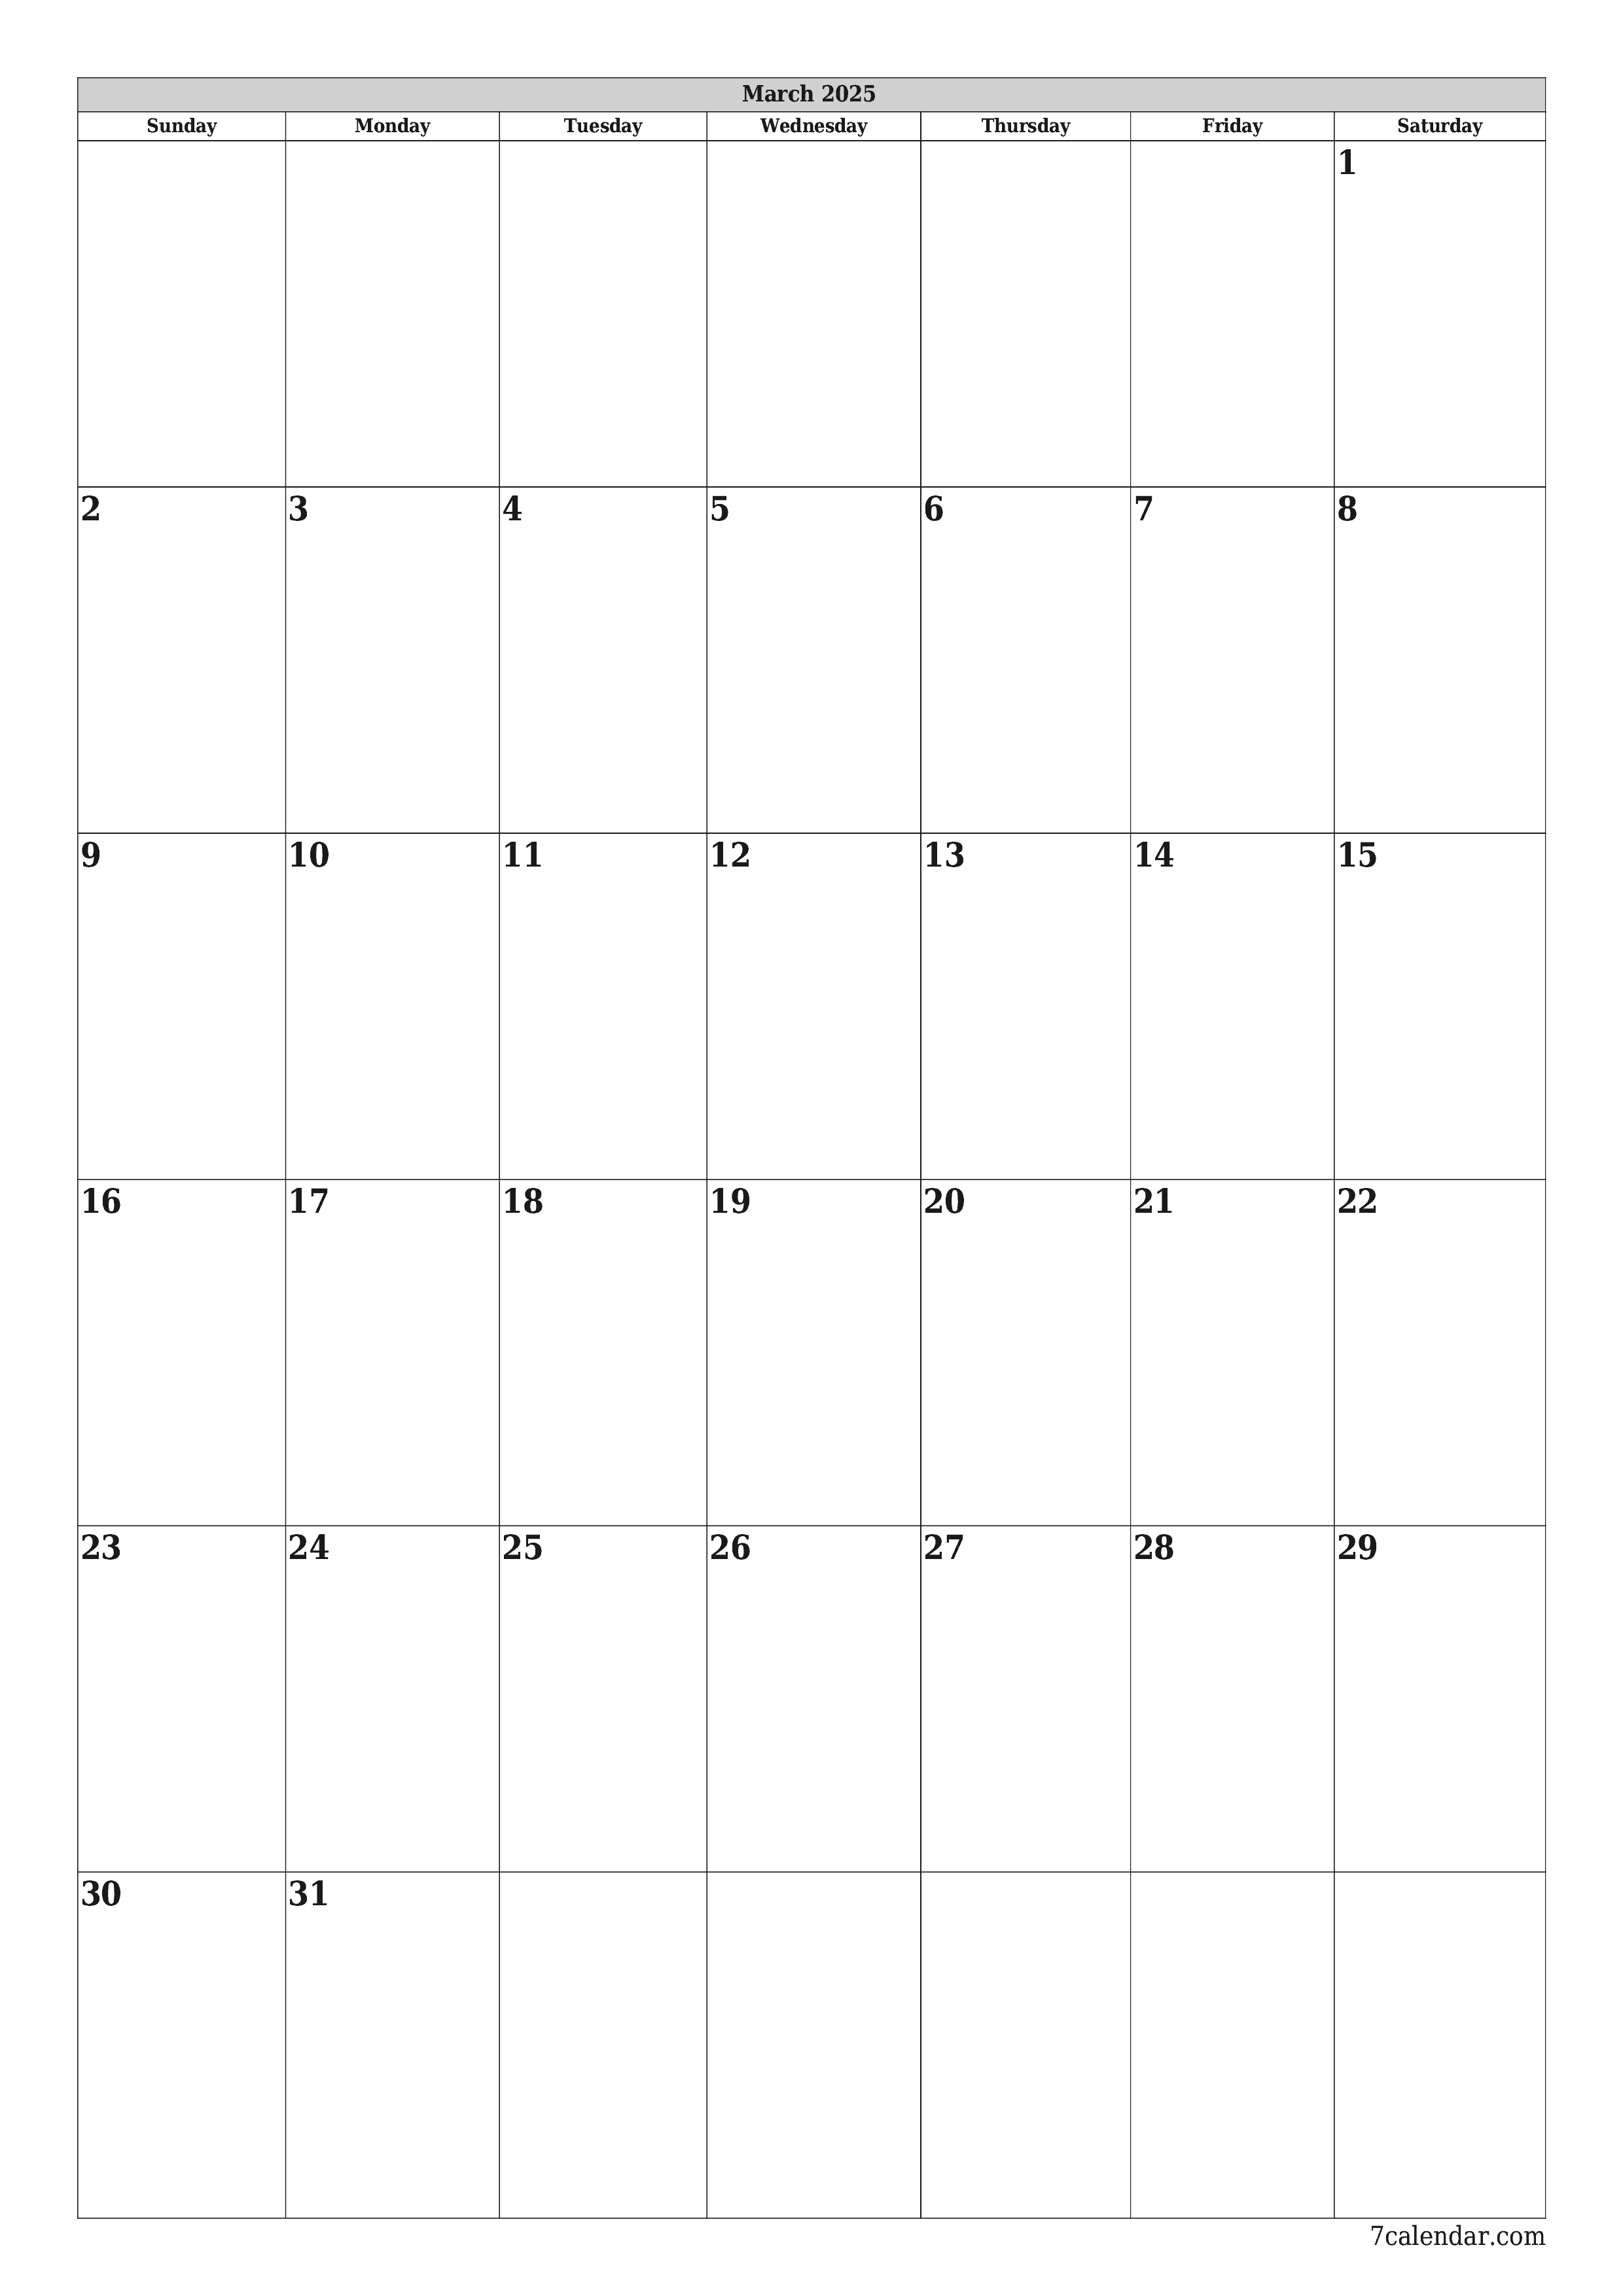 printable wall template free vertical Monthly planner calendar March (Mar) 2025